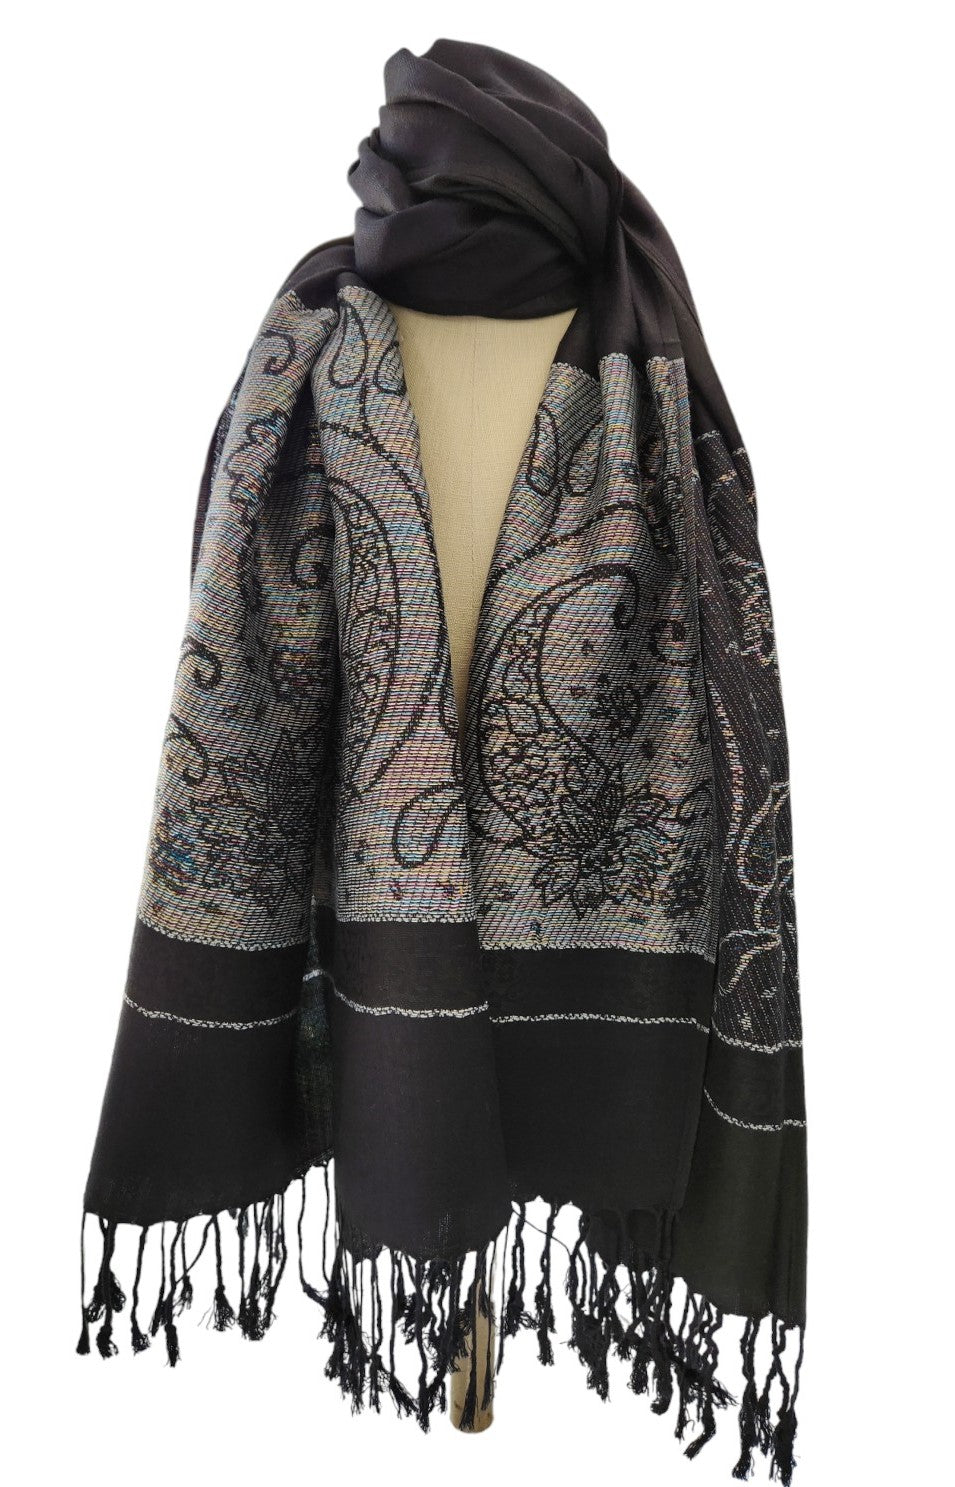 Women's Lightweight Pashmina Floral Paisley Scarves or Wrap - Perfect for Warmer Weather and Change in Seasons